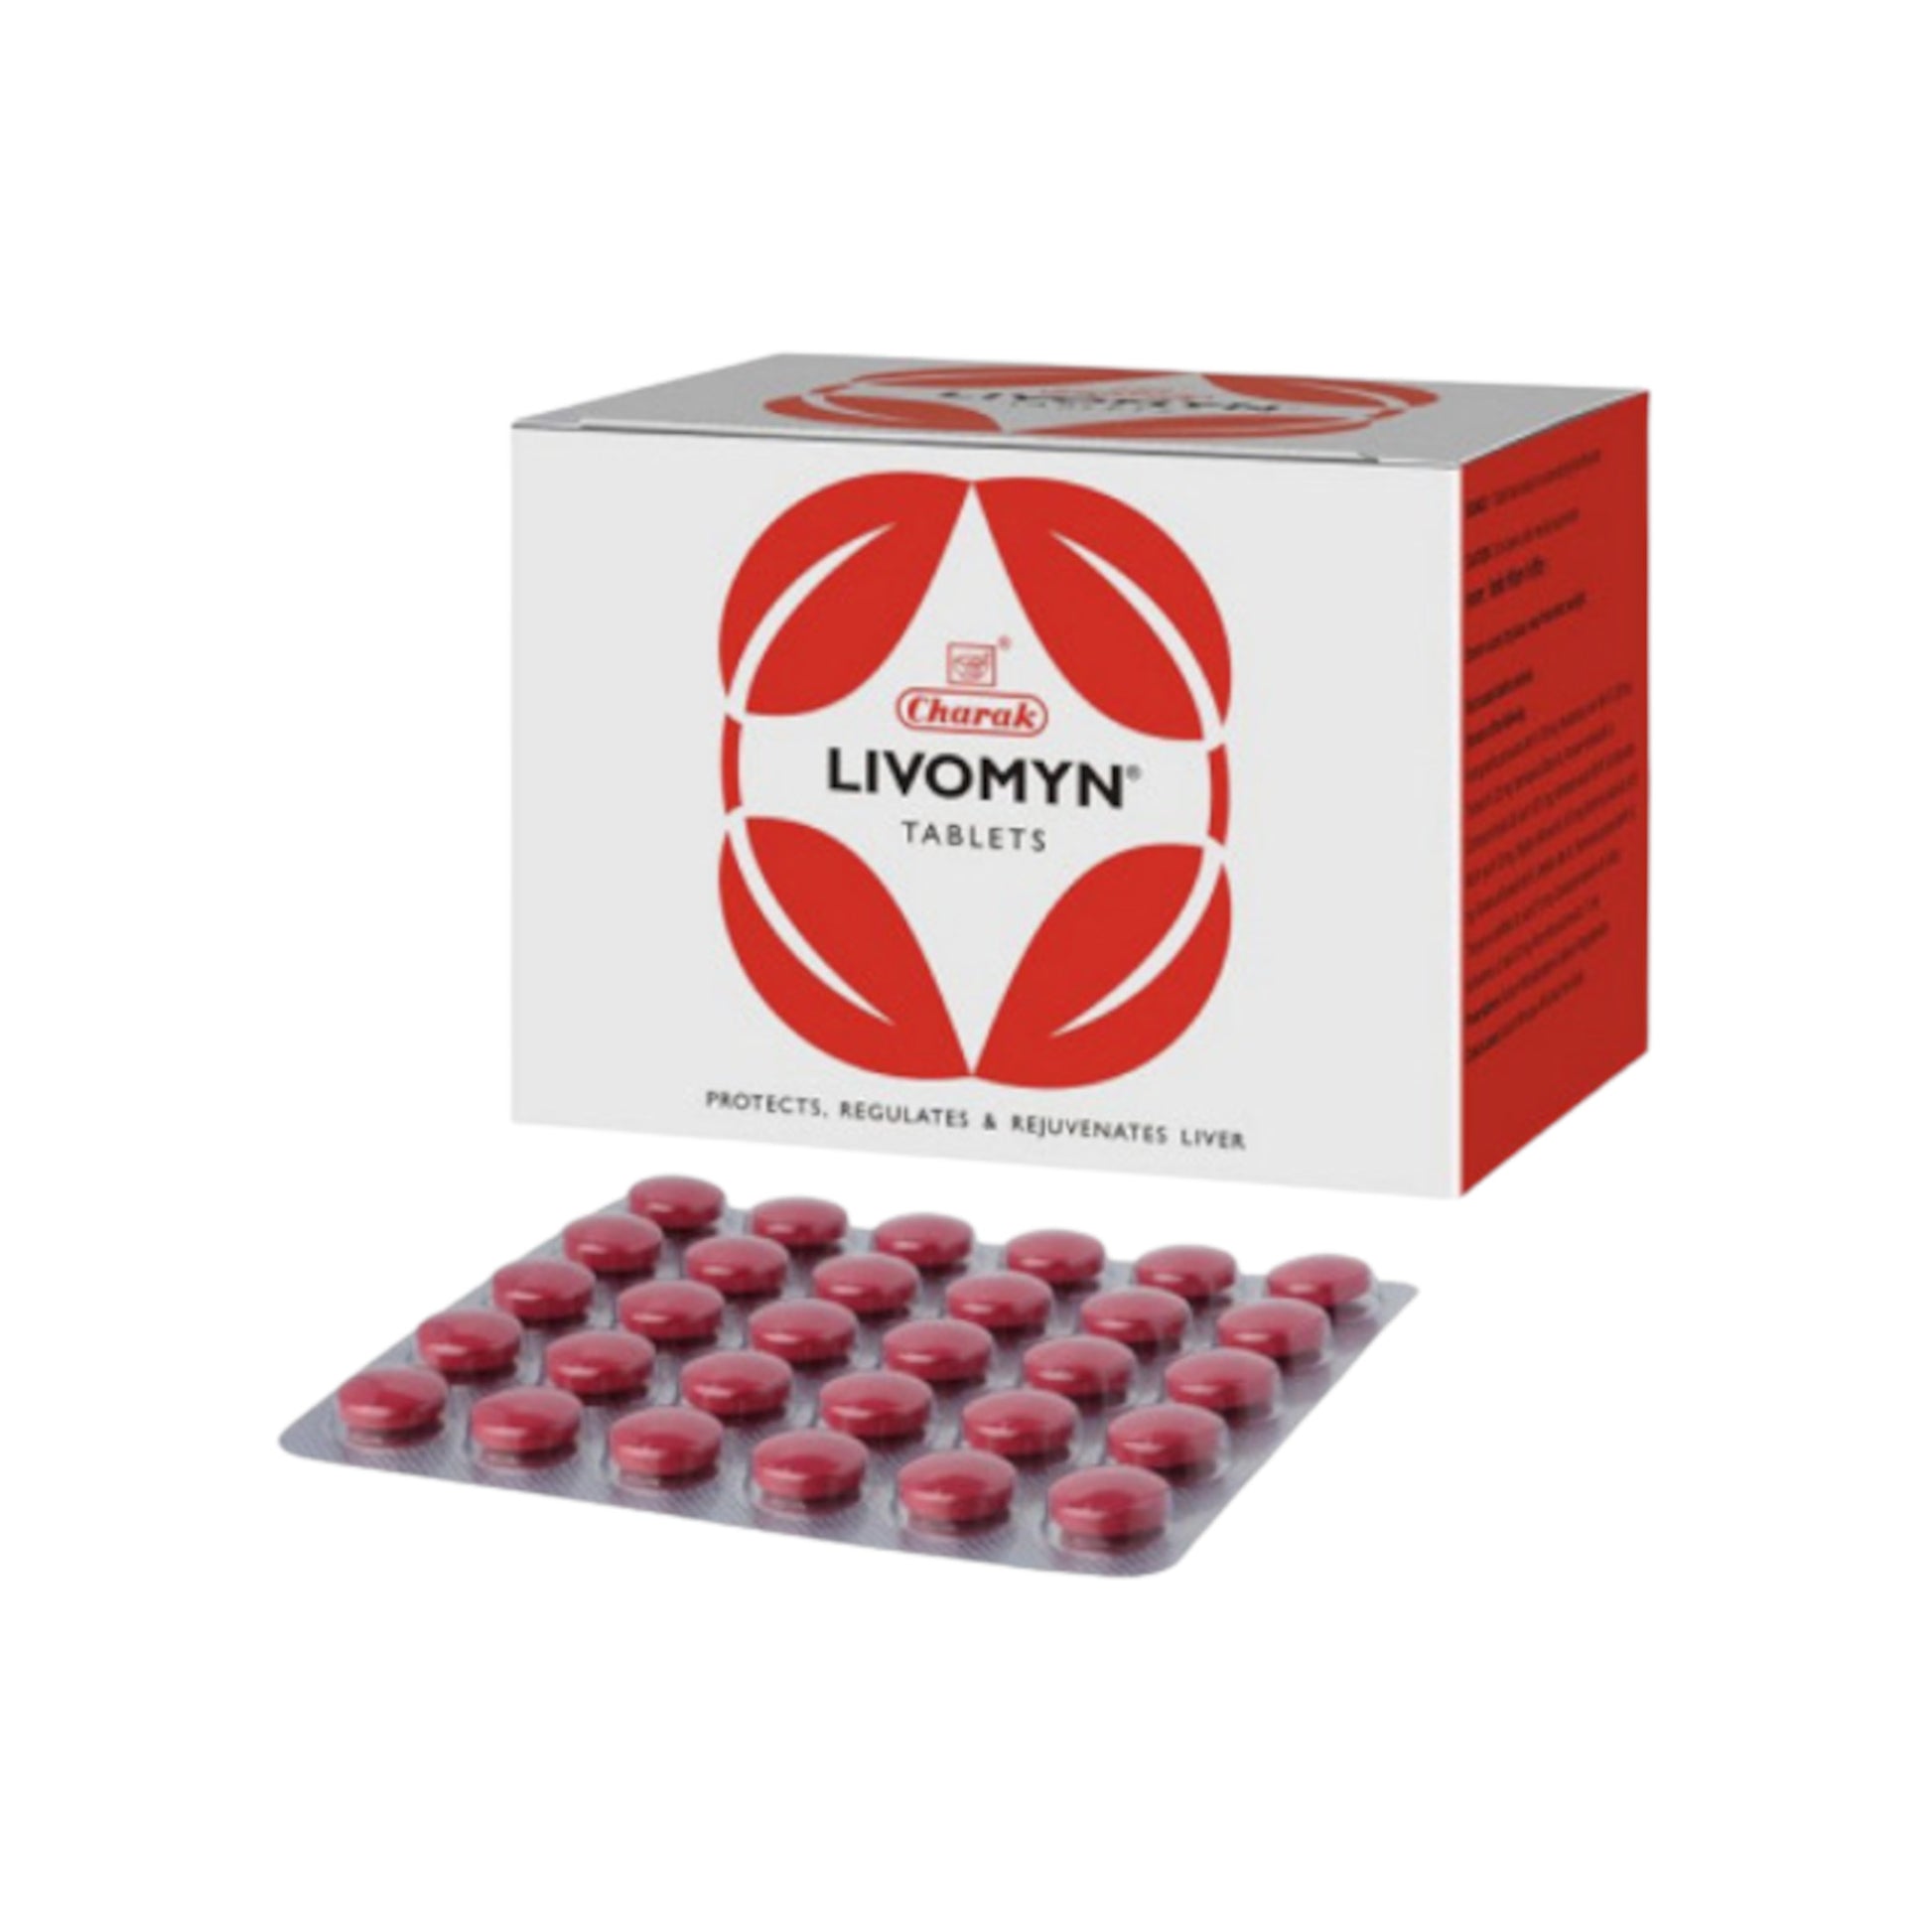 Image of Charak - Livomyn: Ayurvedic liver support for hepatitis, cirrhosis, and more in 30 Tablets.